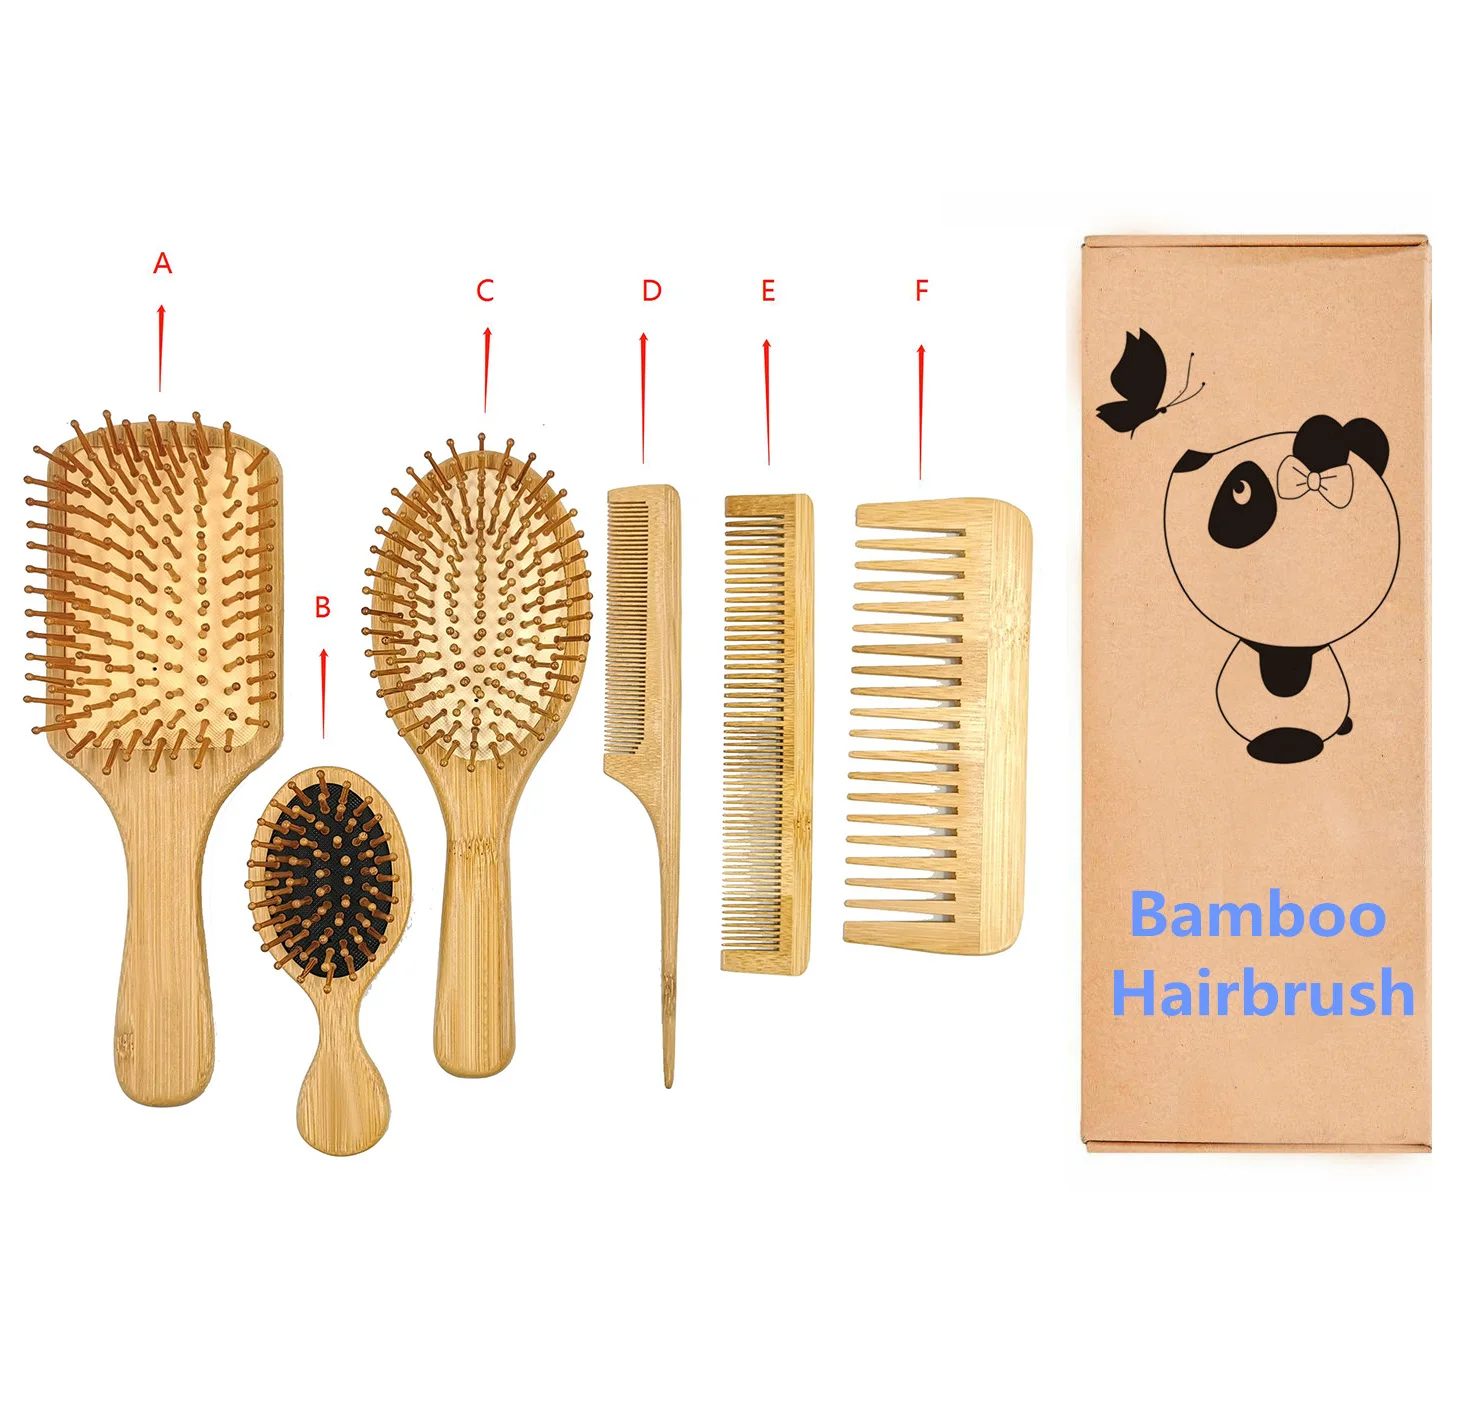 Hot Selling Bamboo Hair Brush And Bamboo Hair Brush Set And Hair Brush  Bamboo Set Wholesale - Buy Hair Brush Bamboo Set,Bamboo Hair Brush,Bamboo  Hairbrush Set Product on 